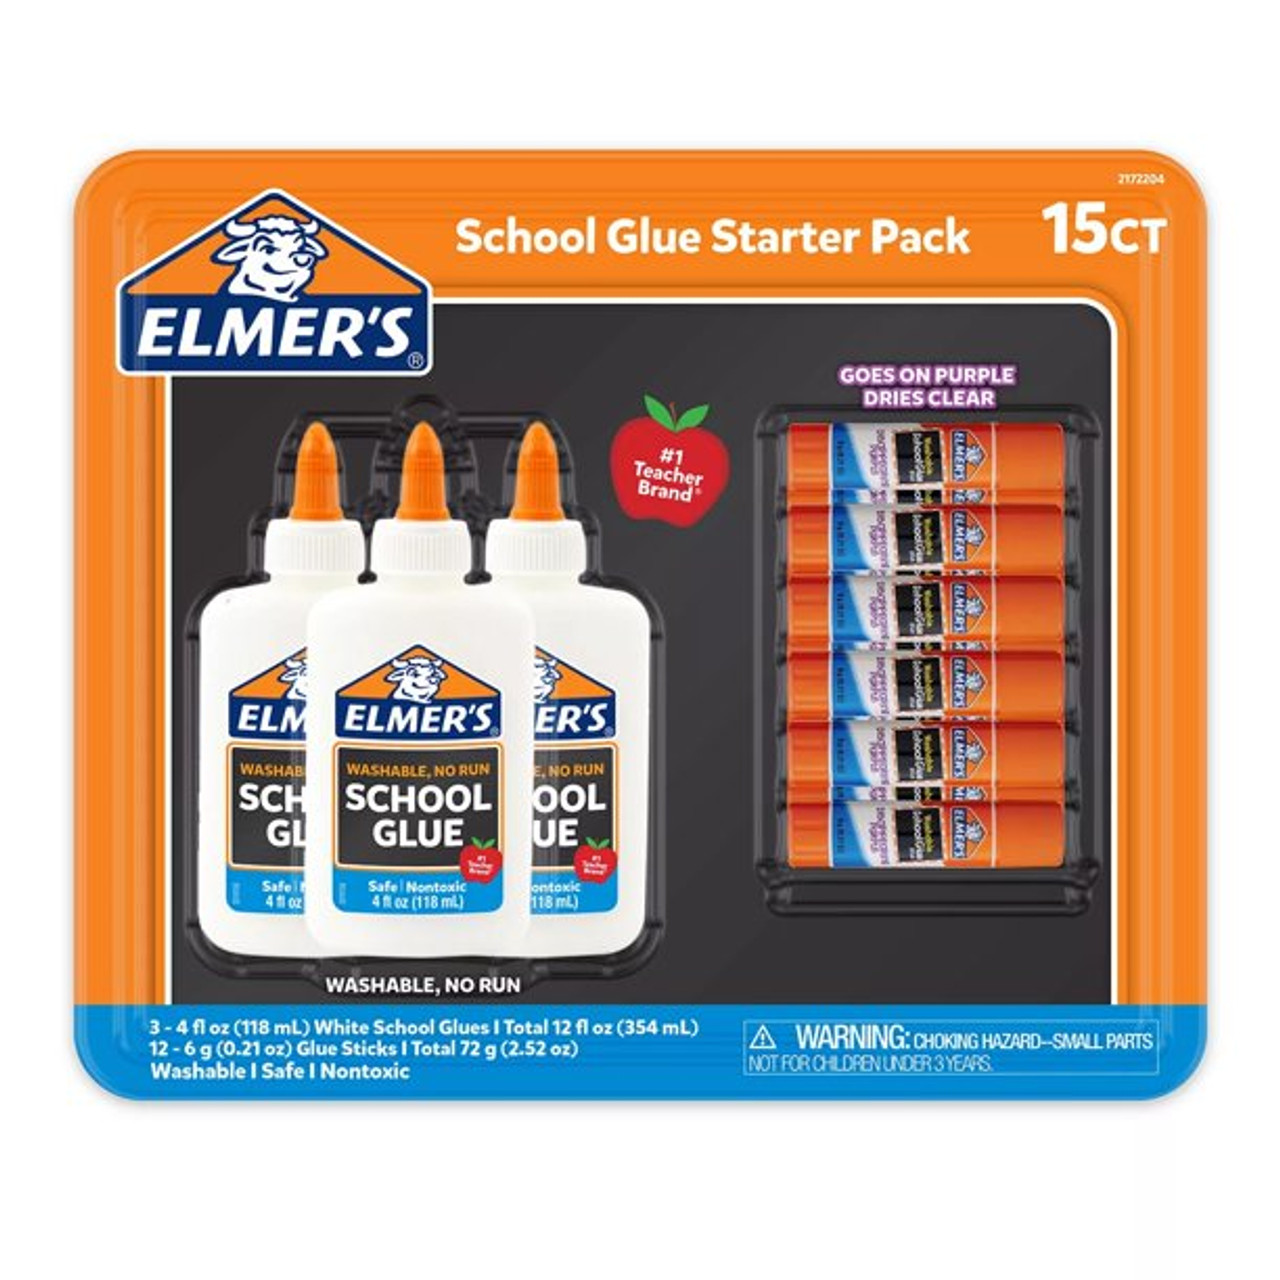 Elmer's School Glue Goes On Purple Dries Clear Washable Safe NEW